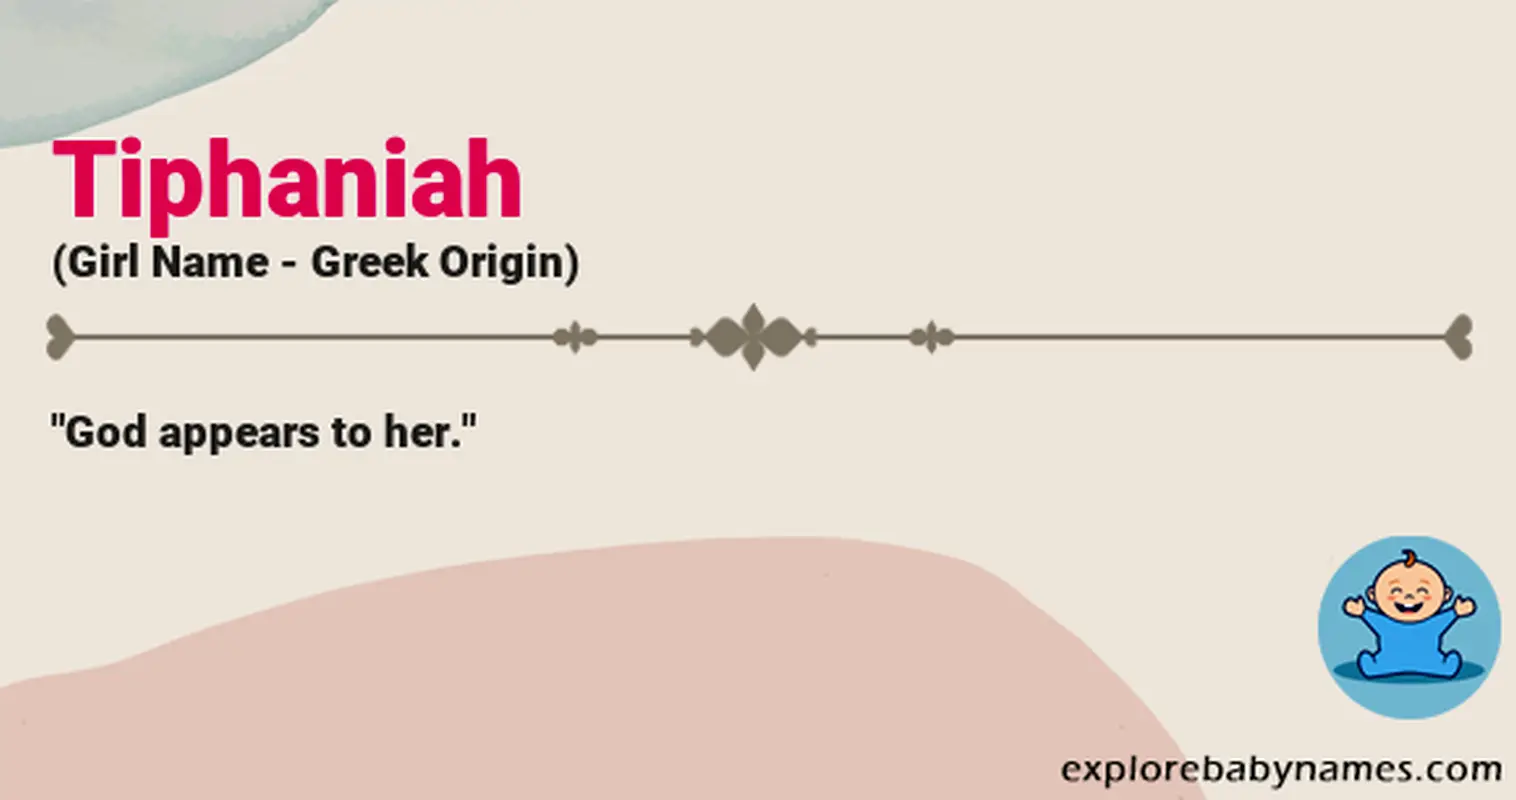 Meaning of Tiphaniah